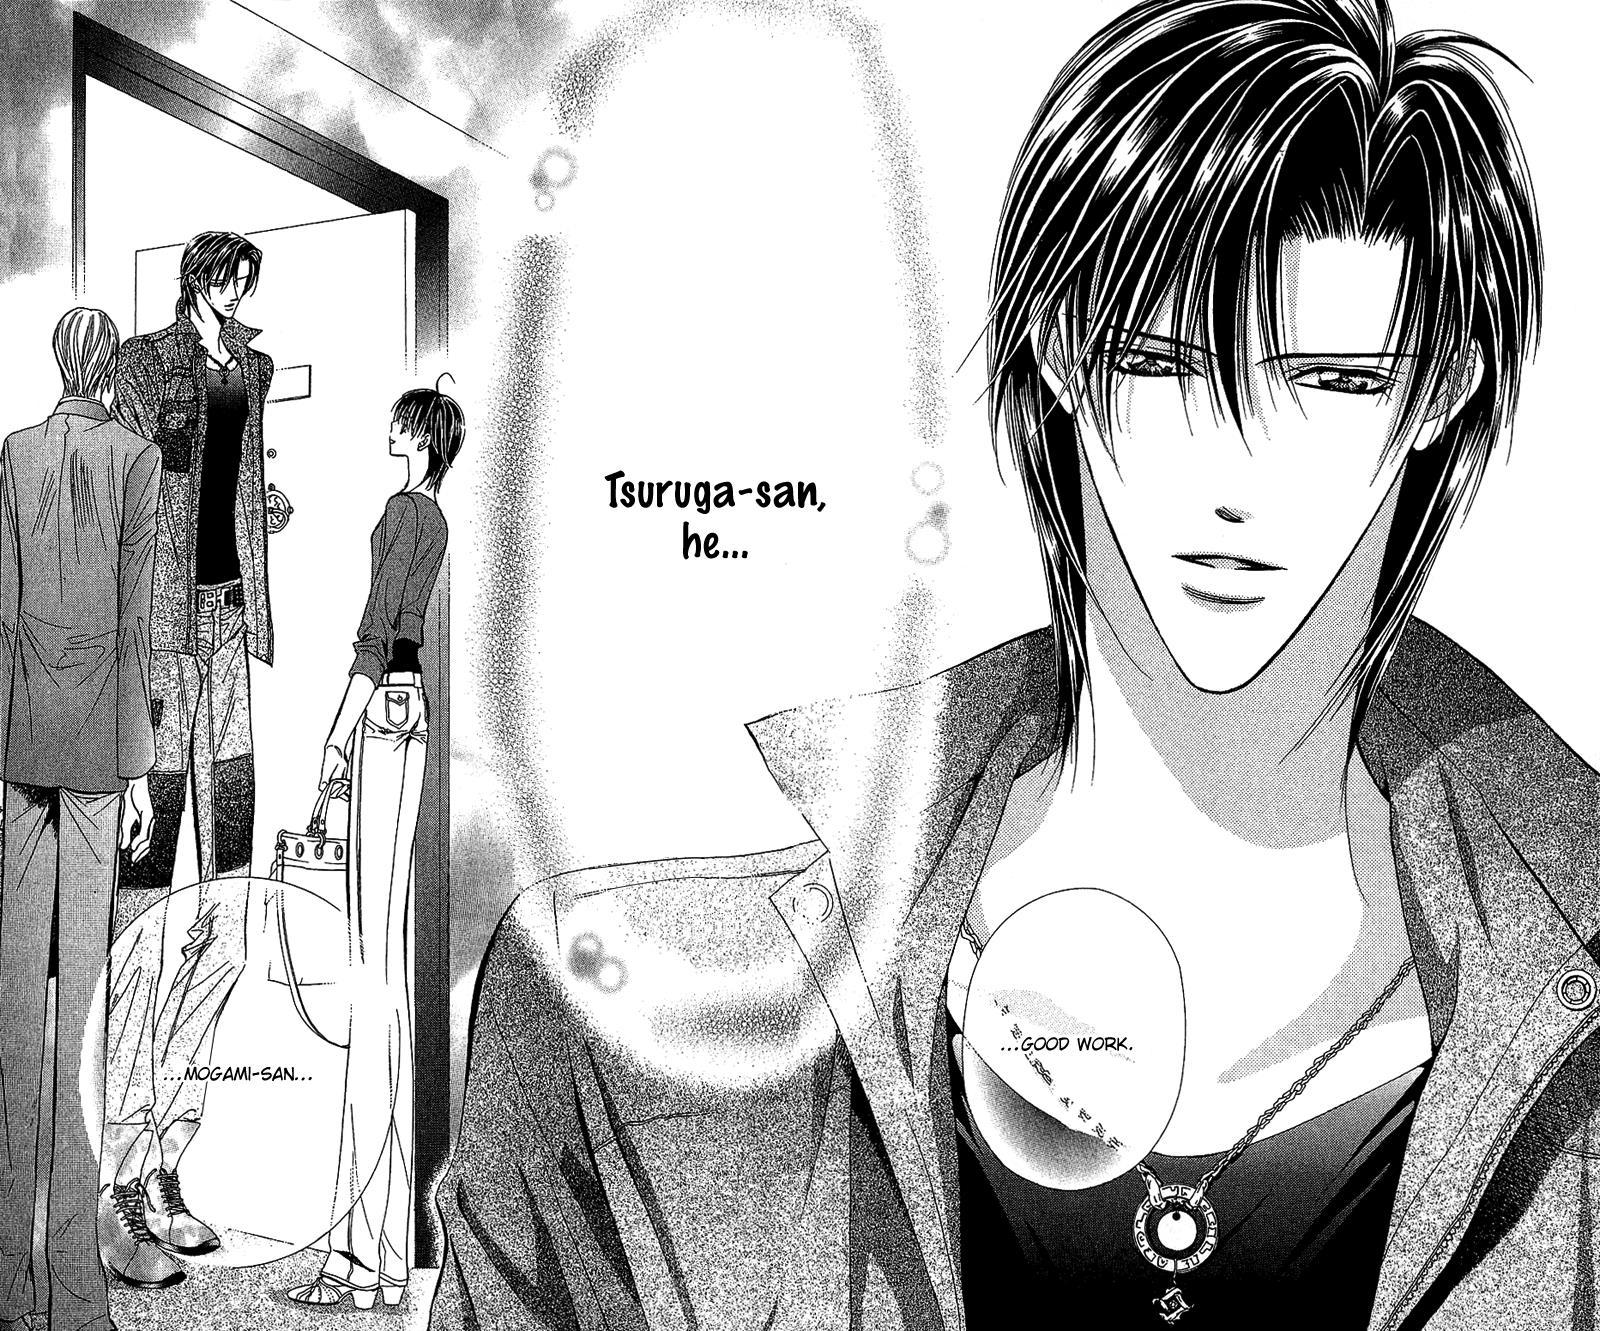 Skip Beat!, Chapter 90 Suddenly, a Love Story- Repeat image 13